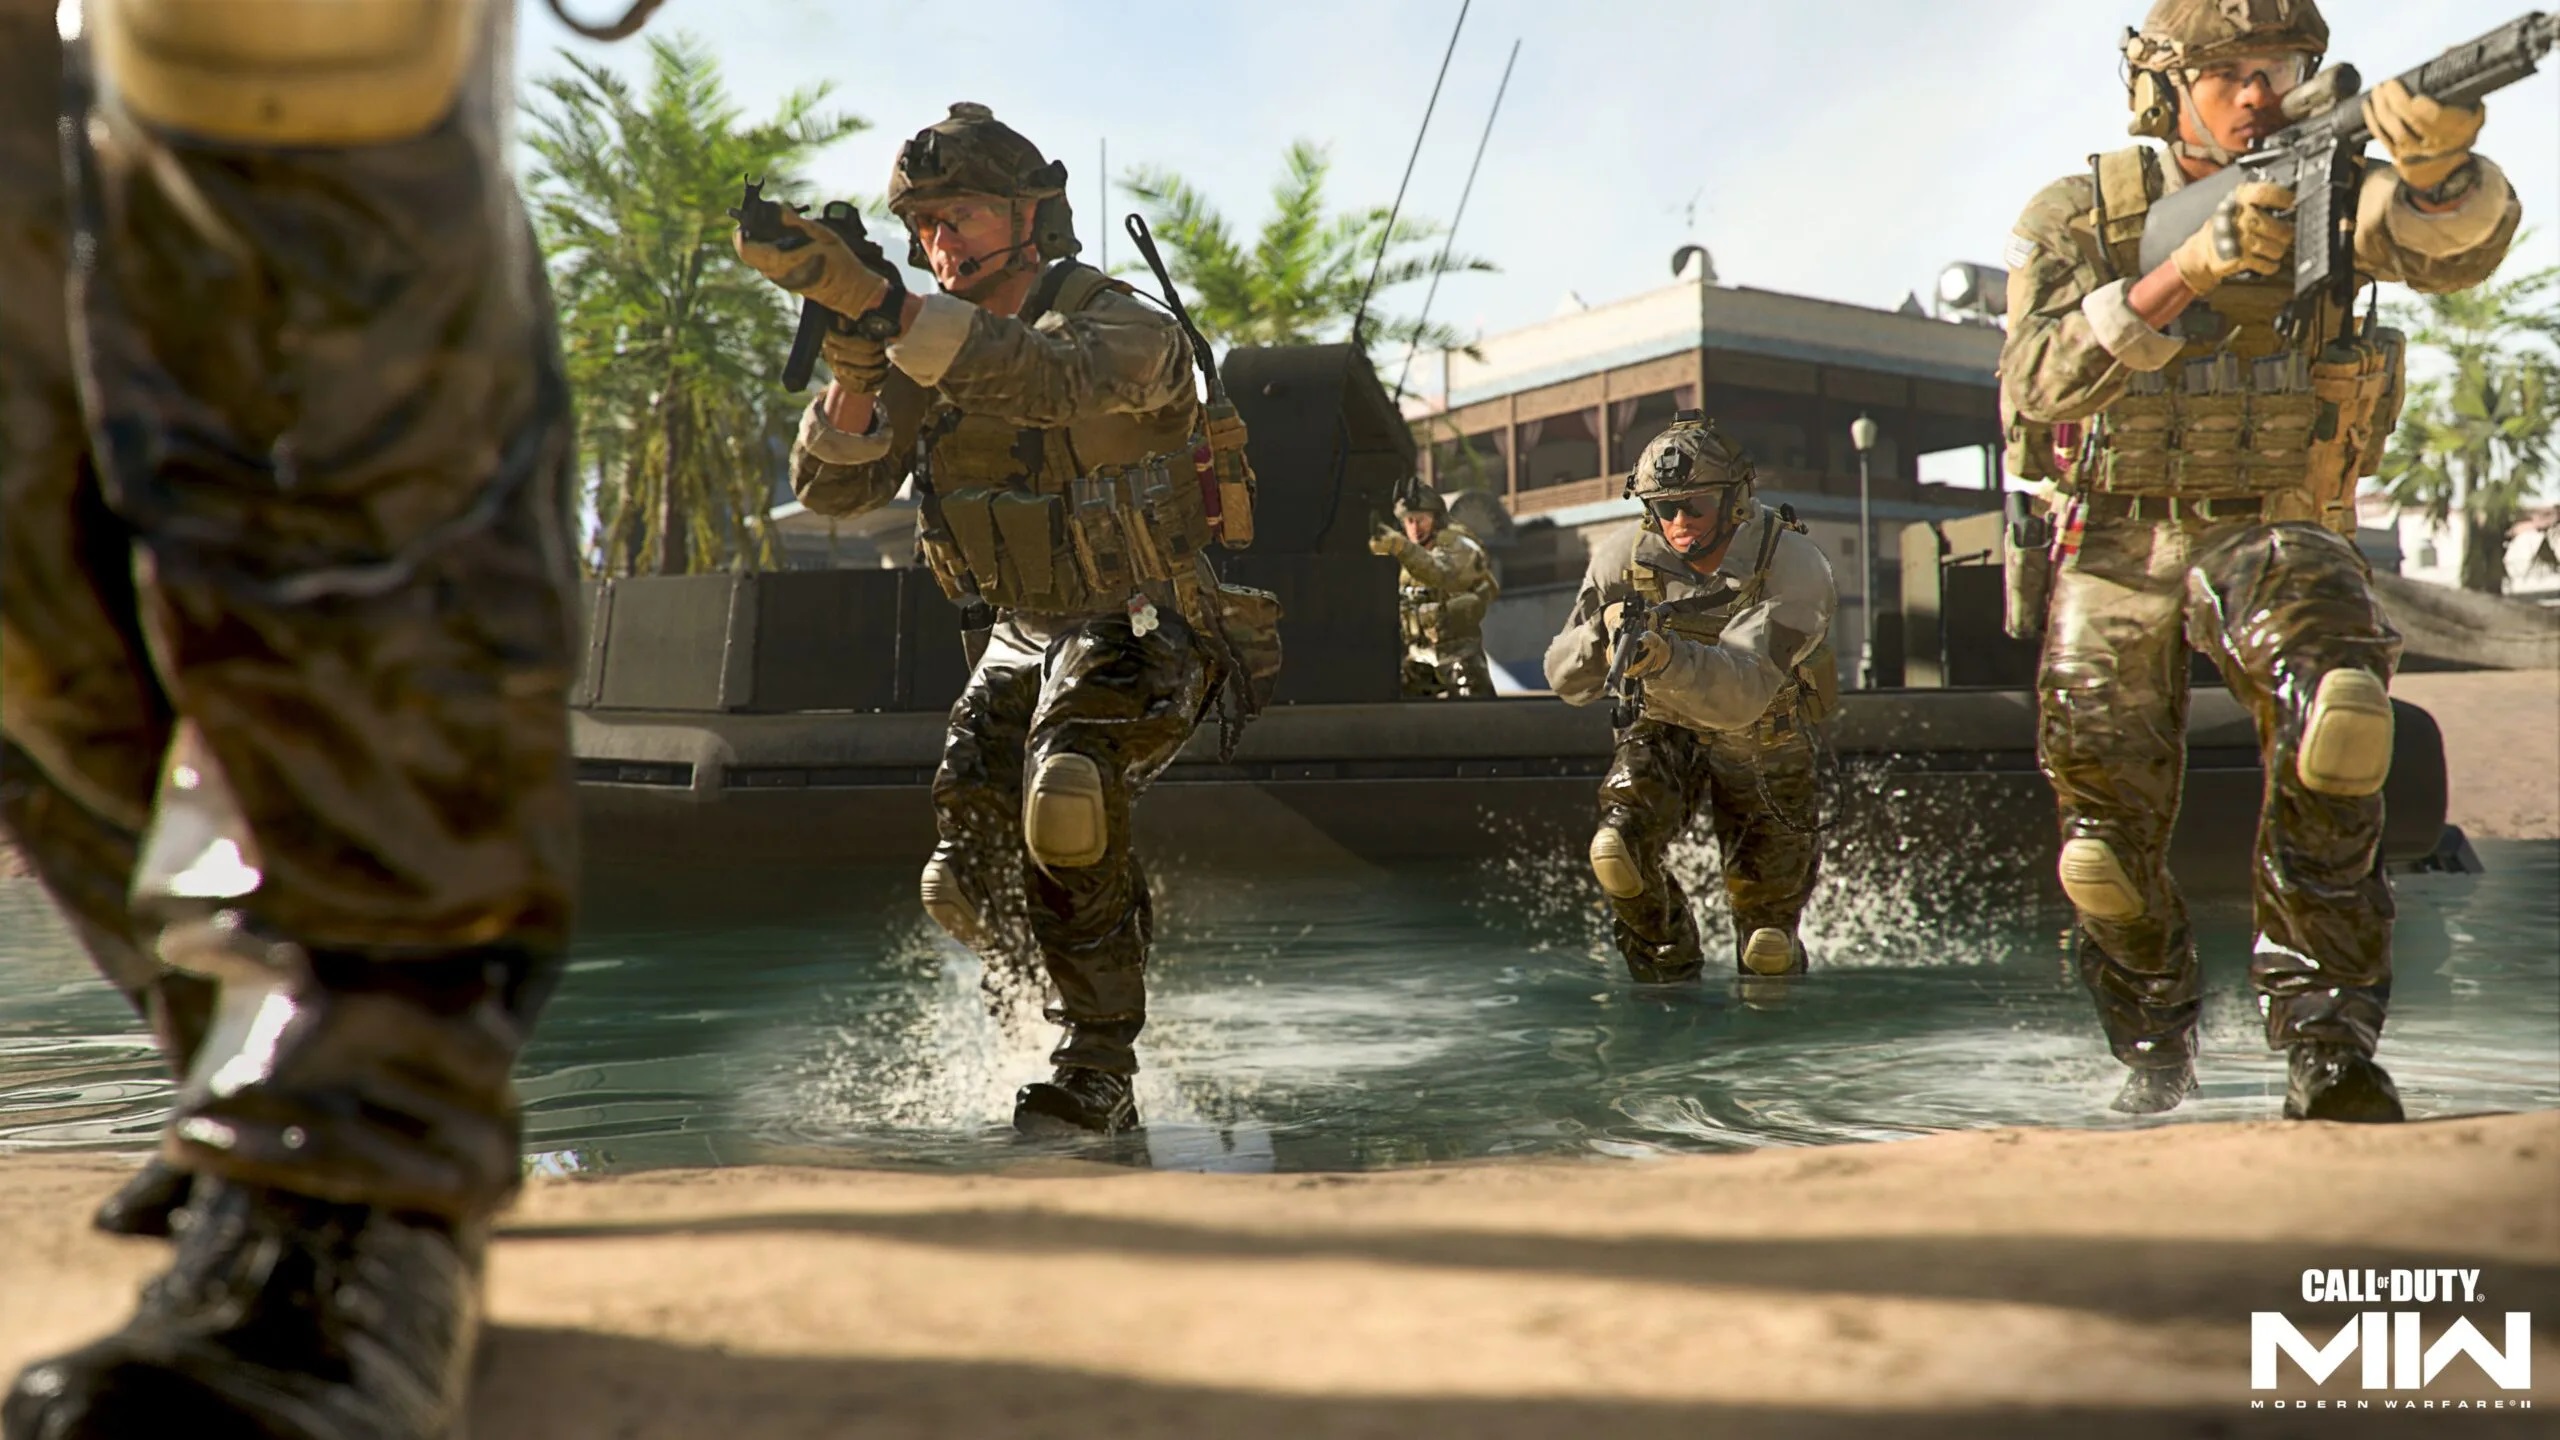 Call of Duty Modern Warfare II (2022) is reportedly in playable